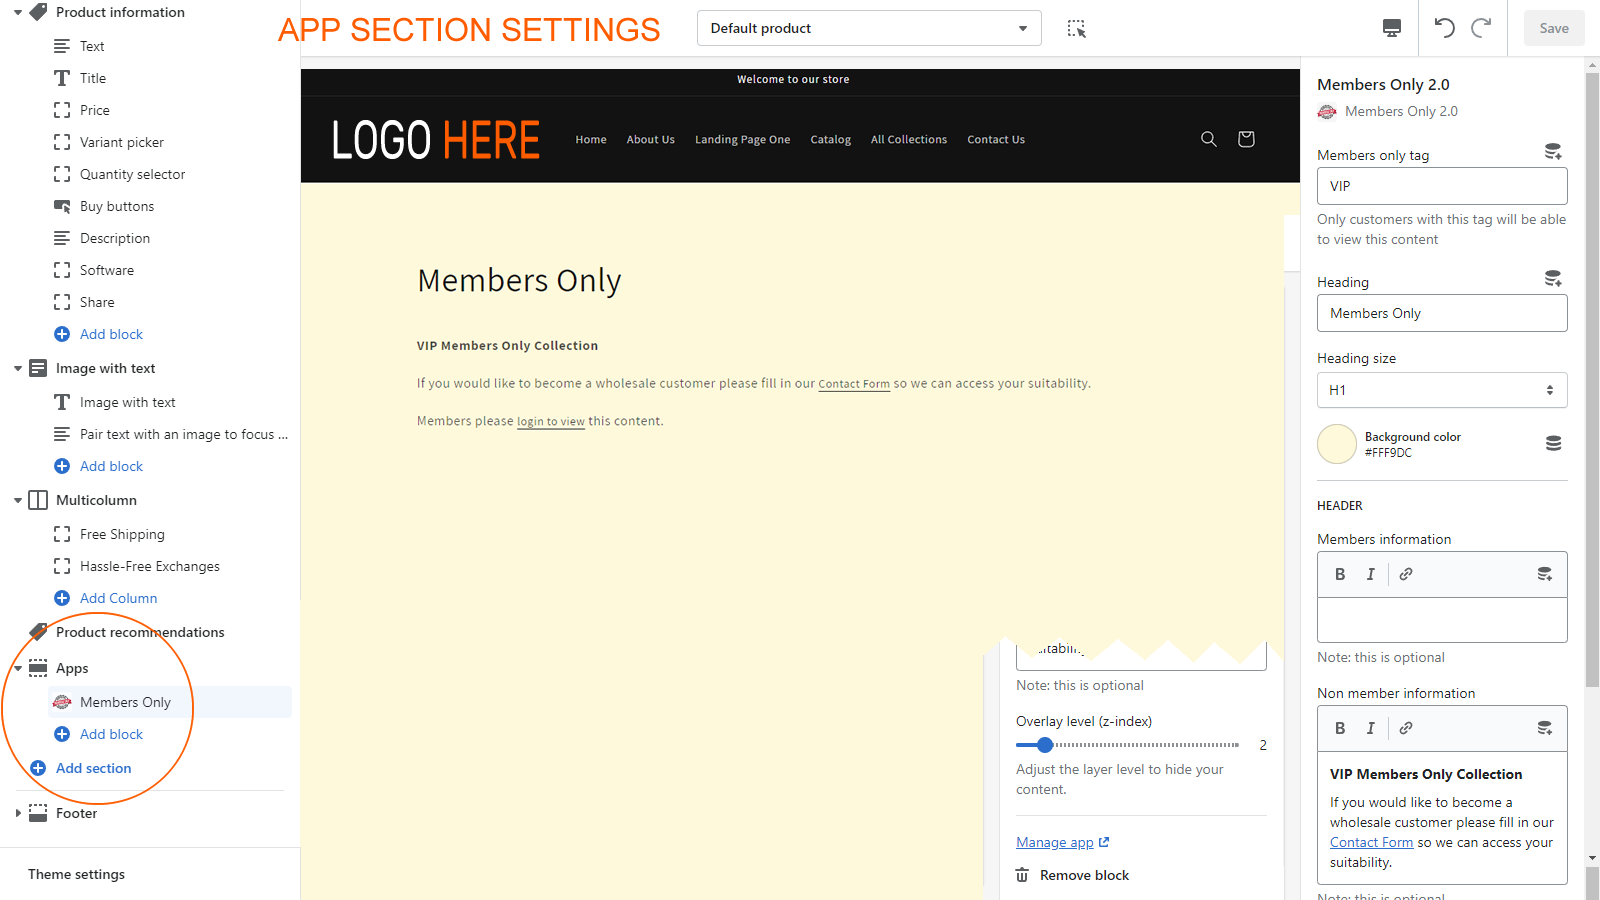 Members only section settings